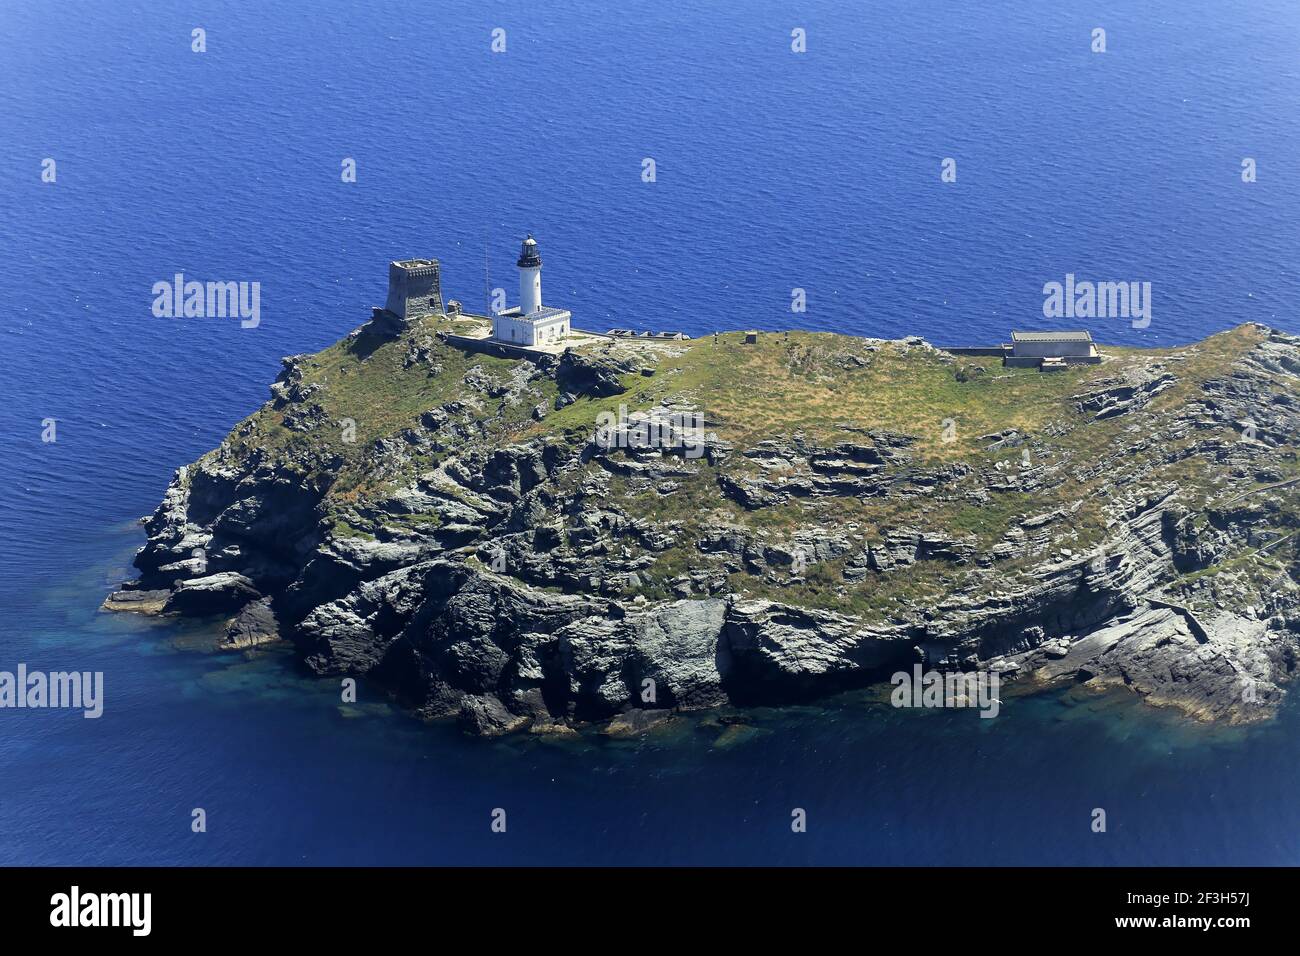 Department of Corse-du-Sud, Southern Corsica: aerial view of Giraglia Island with its lighthouse and a Genoese tower dating back to the 16th century, Stock Photo